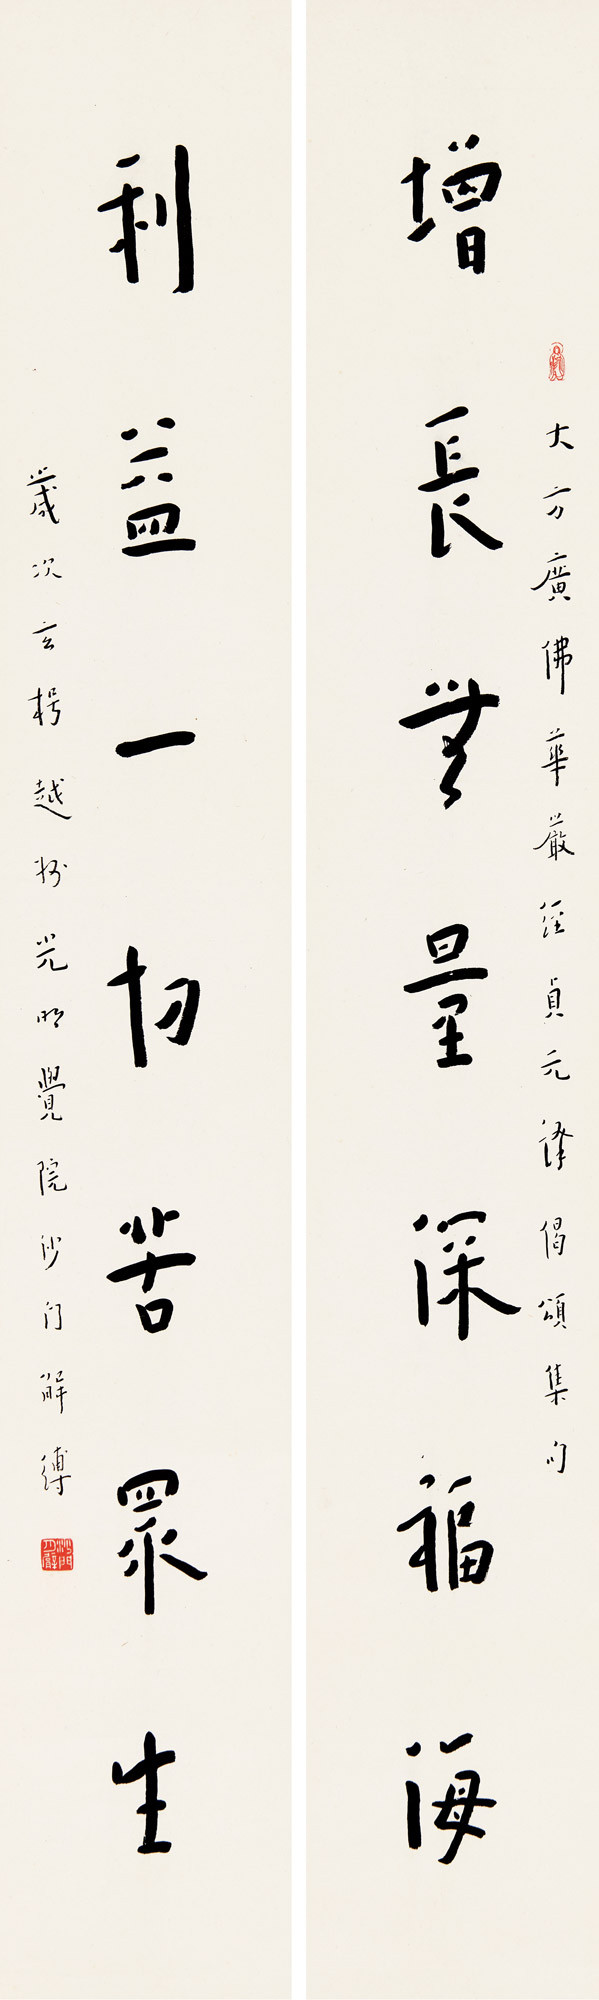 Seven - Characters Calligraphic Couplet